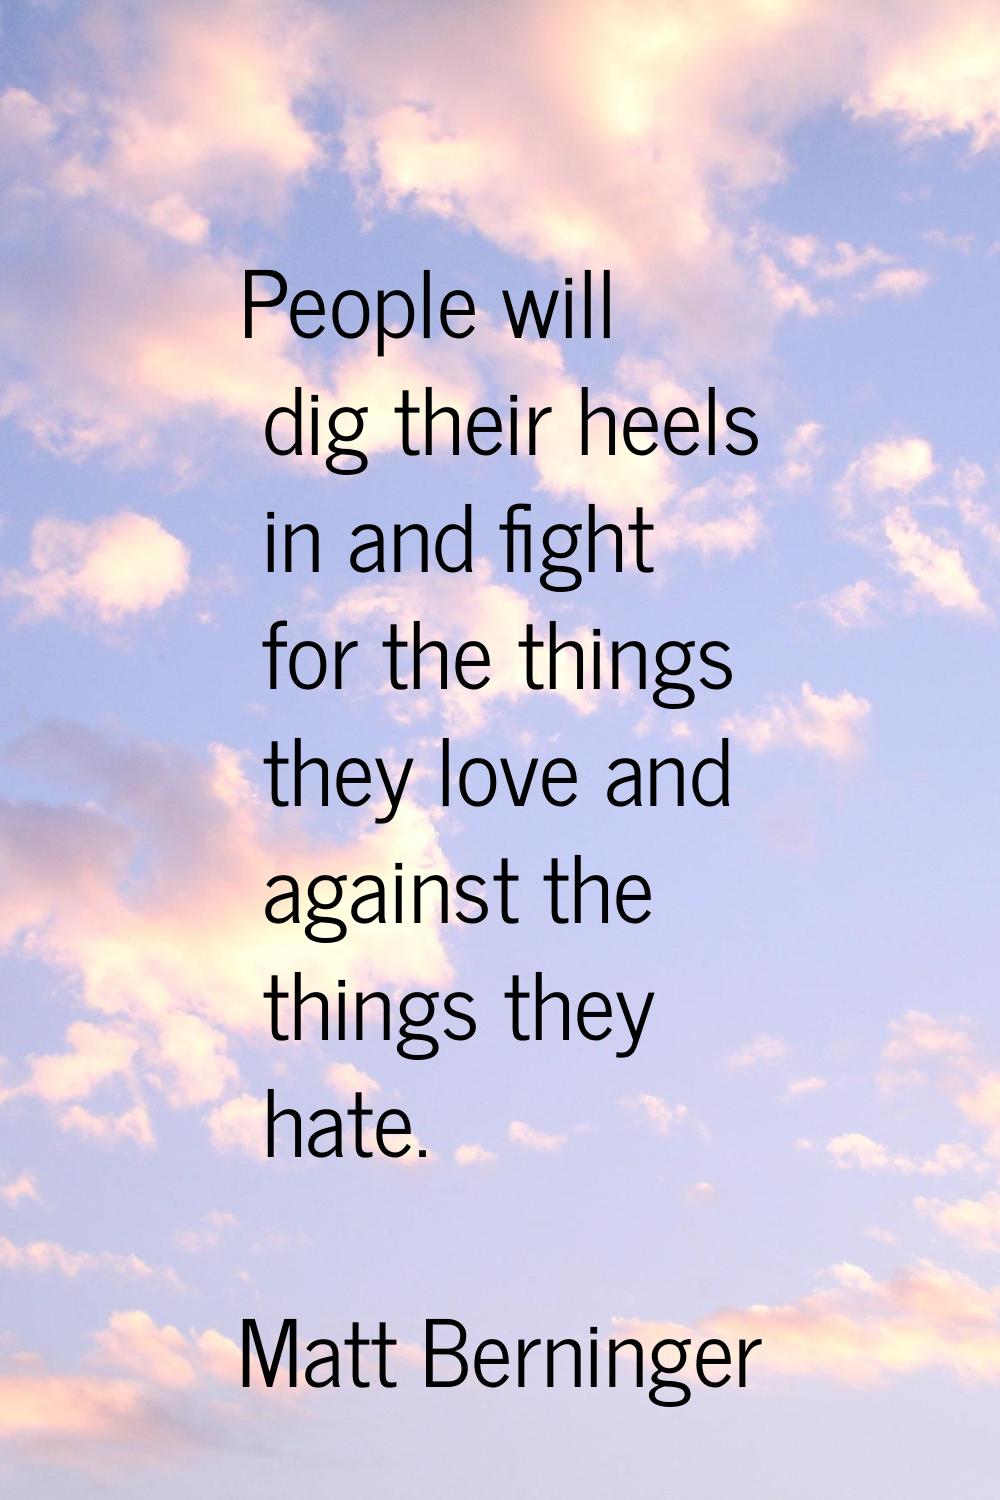 People will dig their heels in and fight for the things they love and against the things they hate.